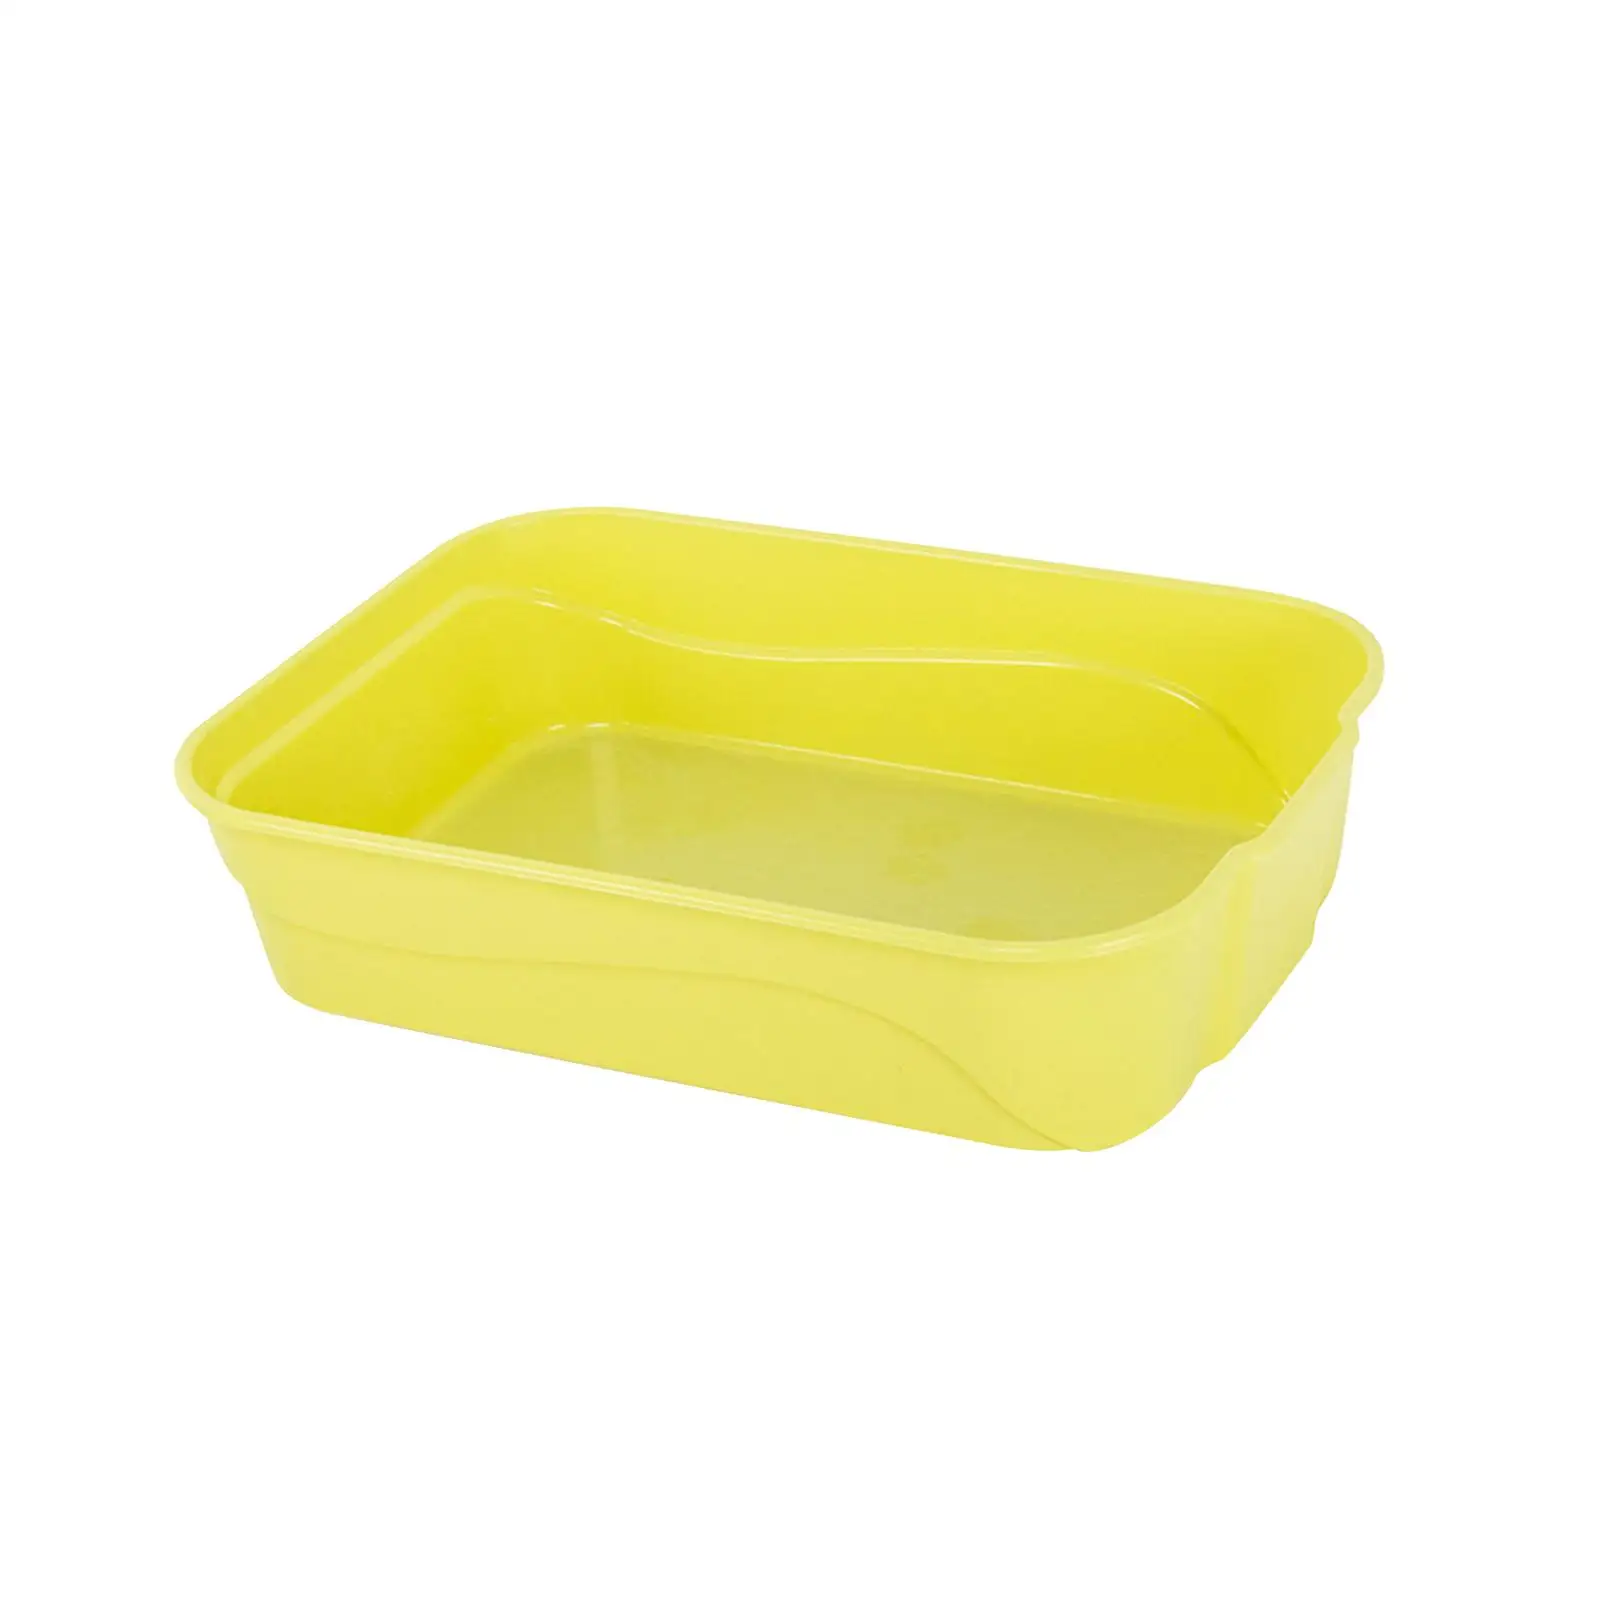 Cat Litter Box Prevent Sand Leakage Kitty Litter Box Anti Splashing Open Kitty Litter Pan Kitten Potty Pan for Small Pet